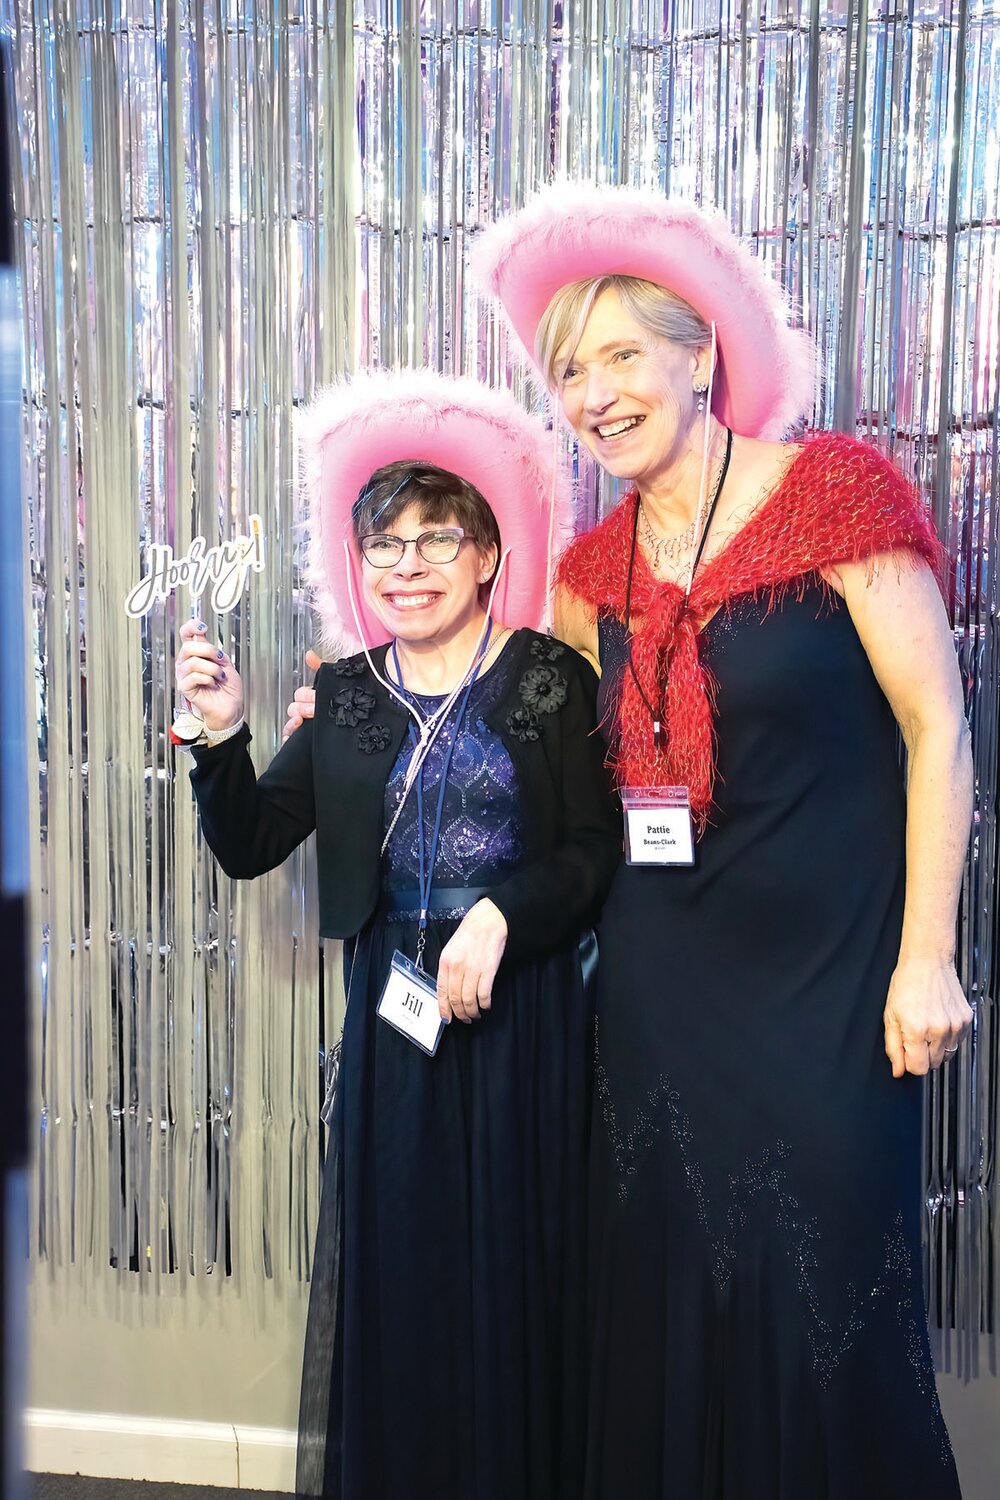 Jill Herman and her Night to Shine buddy Pattie Beans-Clark at the photo booth.